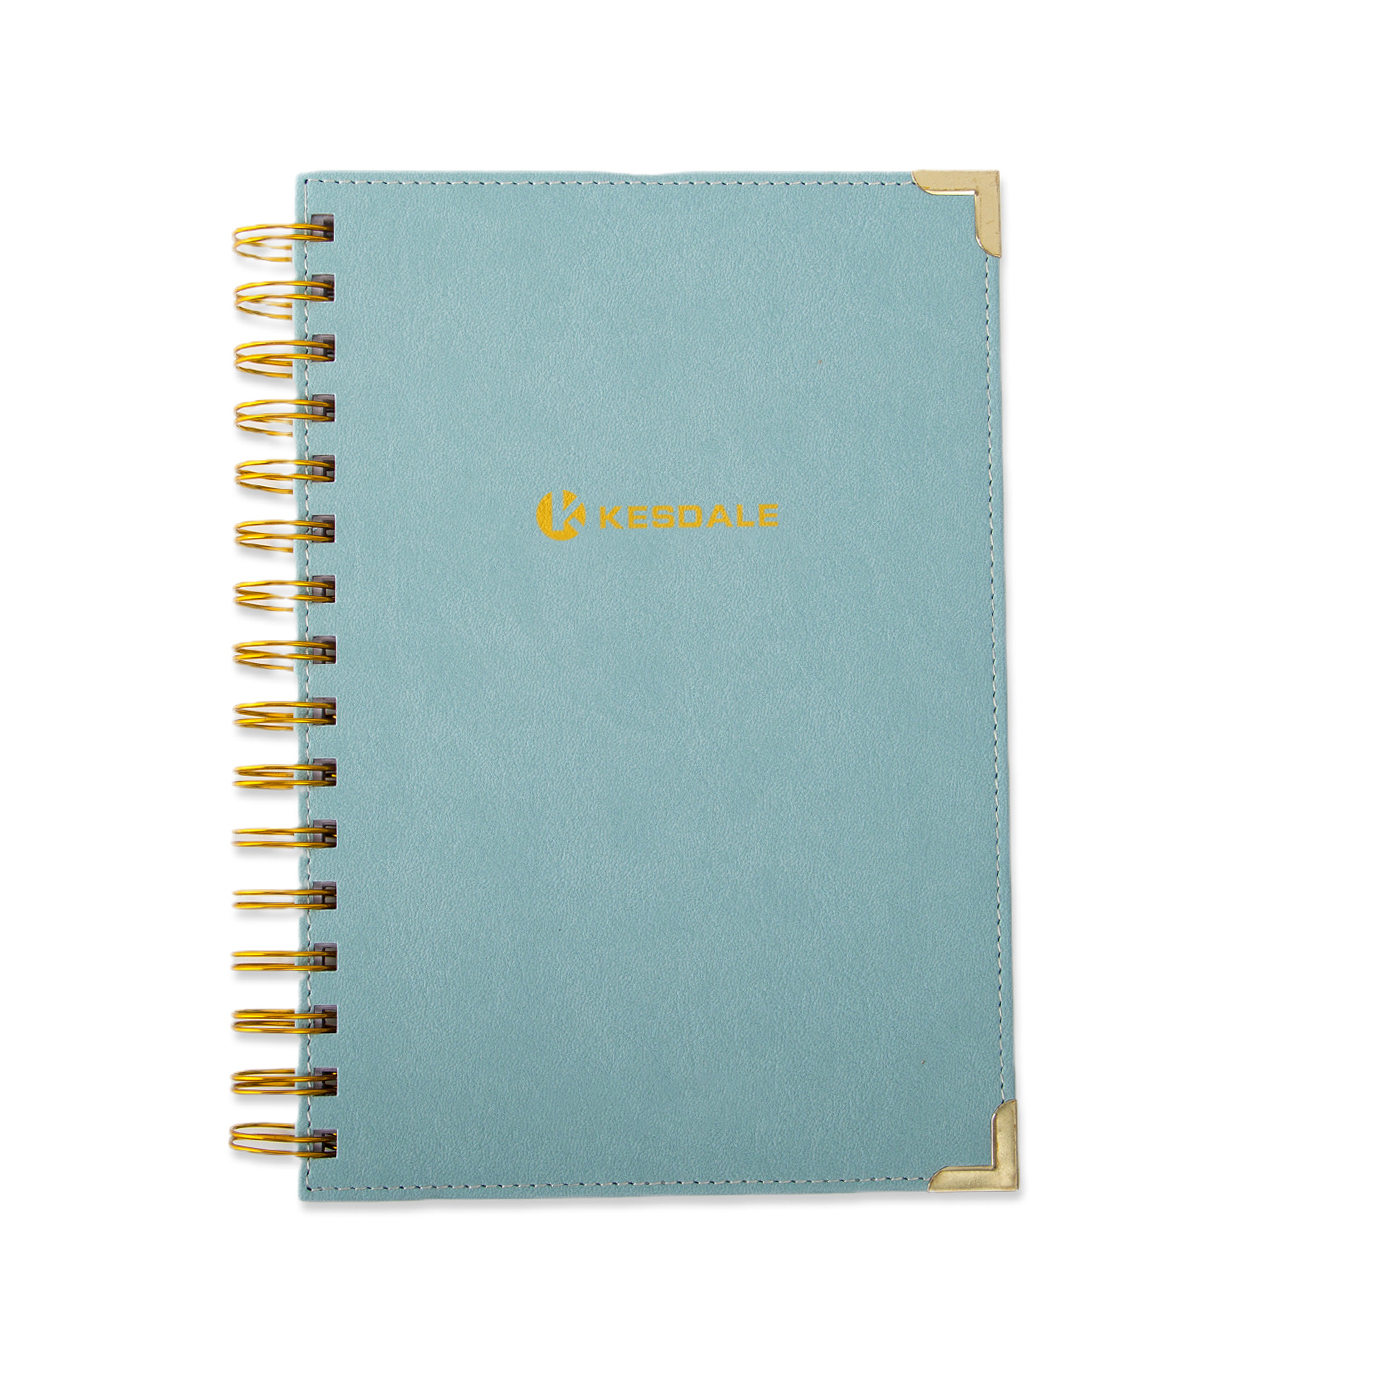 Personalized A5 Spiral Notebook